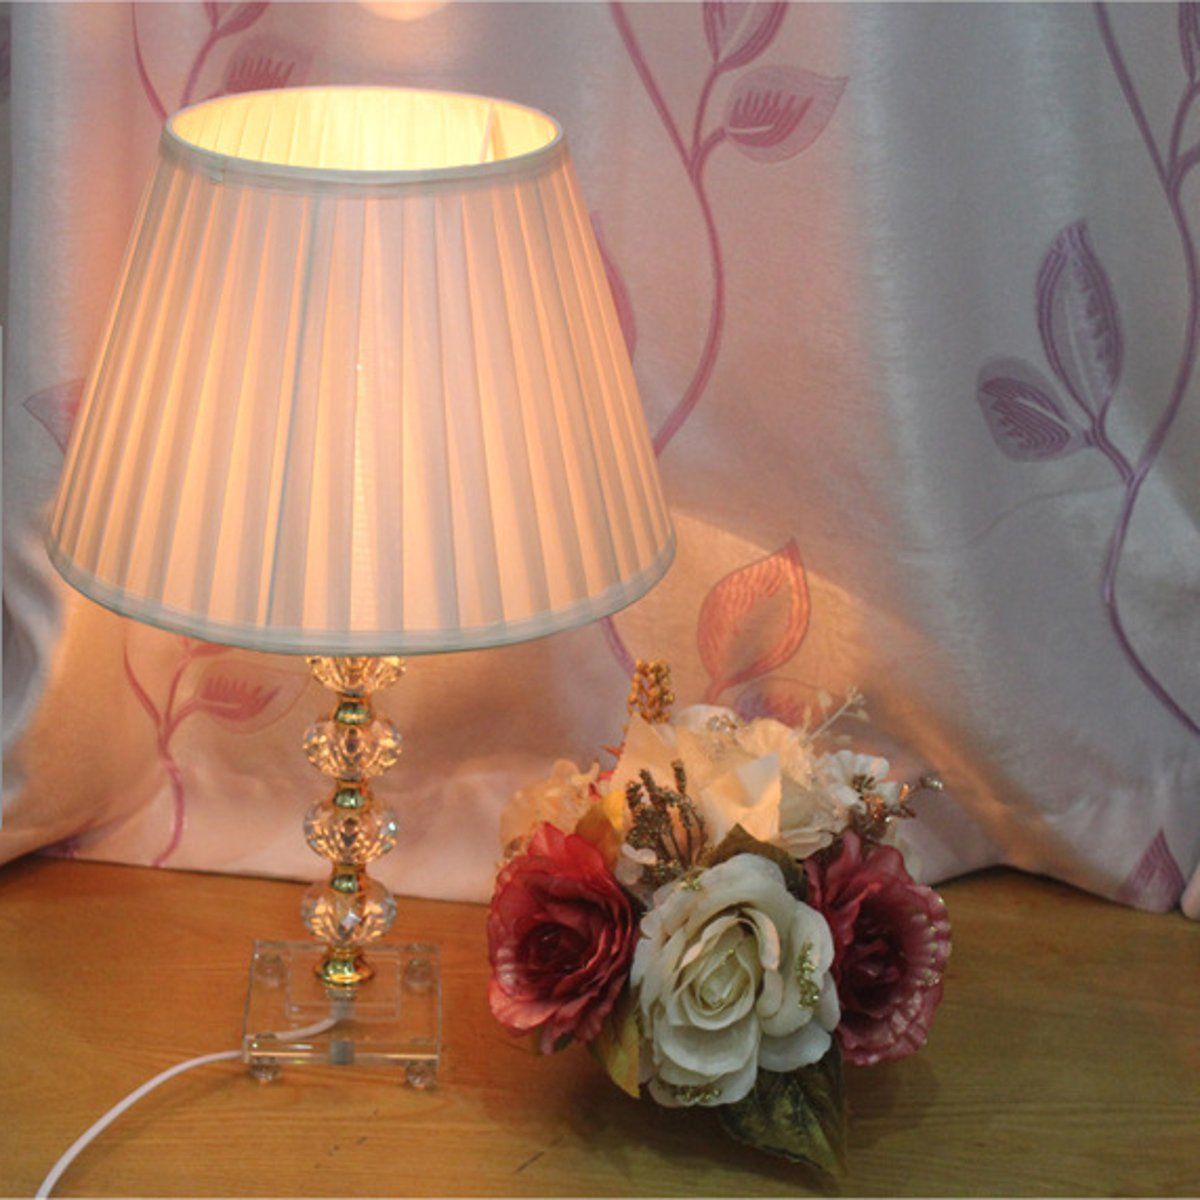 222630354045CM-Diameter-Fabric-Champagne-Light-Lampshade-Home-Table-Lamp-Fixture-Cover-Decor-1299584